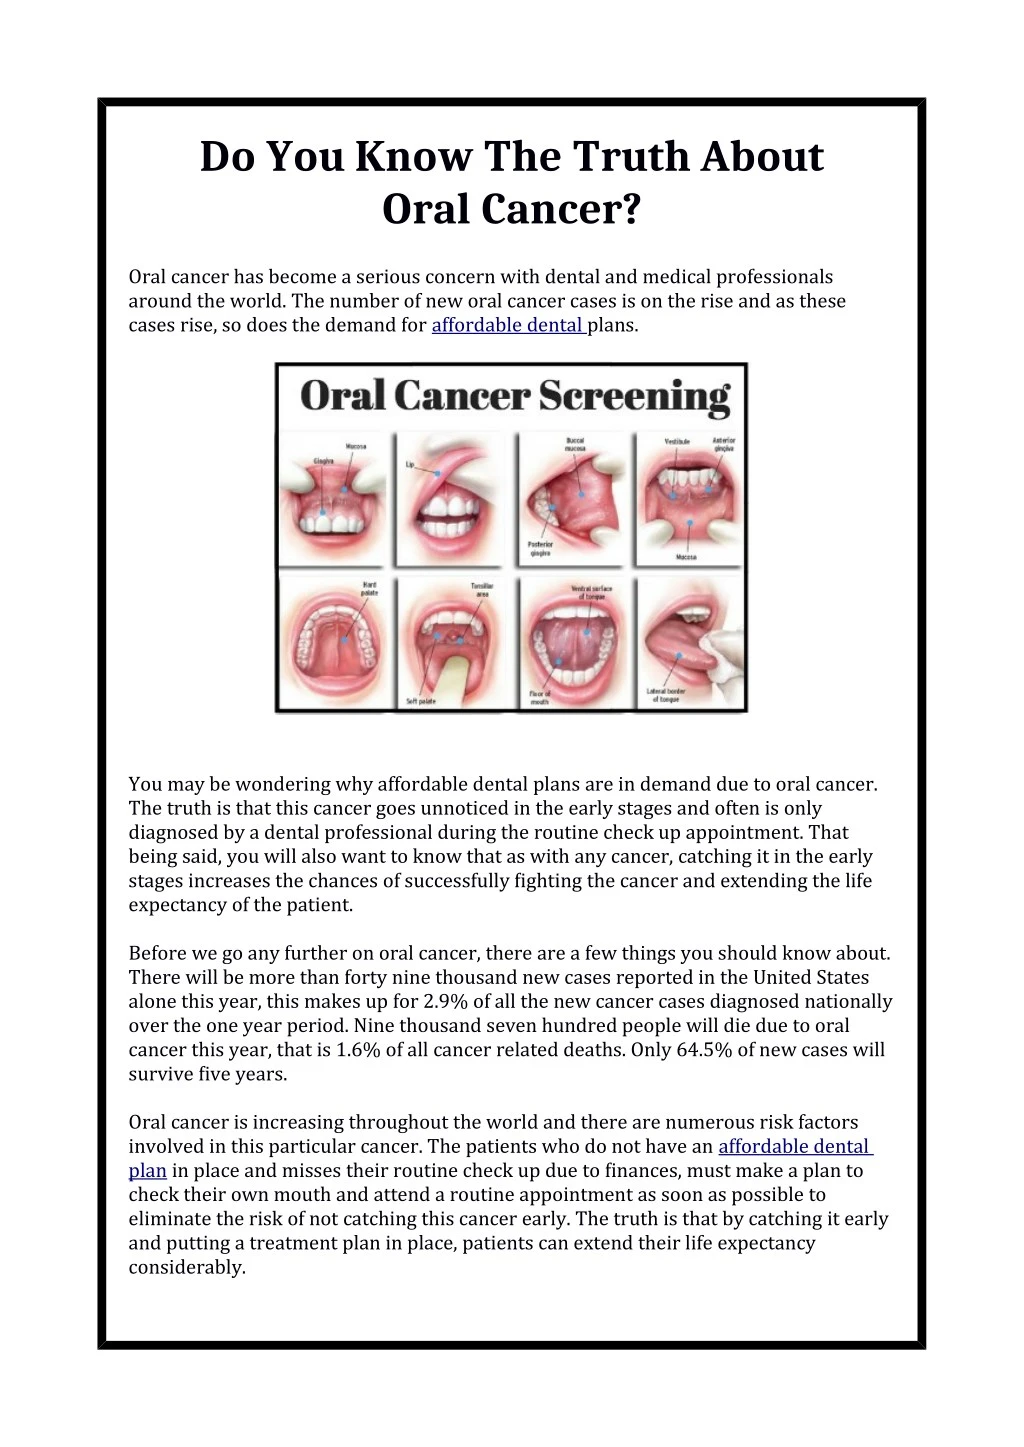 do you know the truth about oral cancer